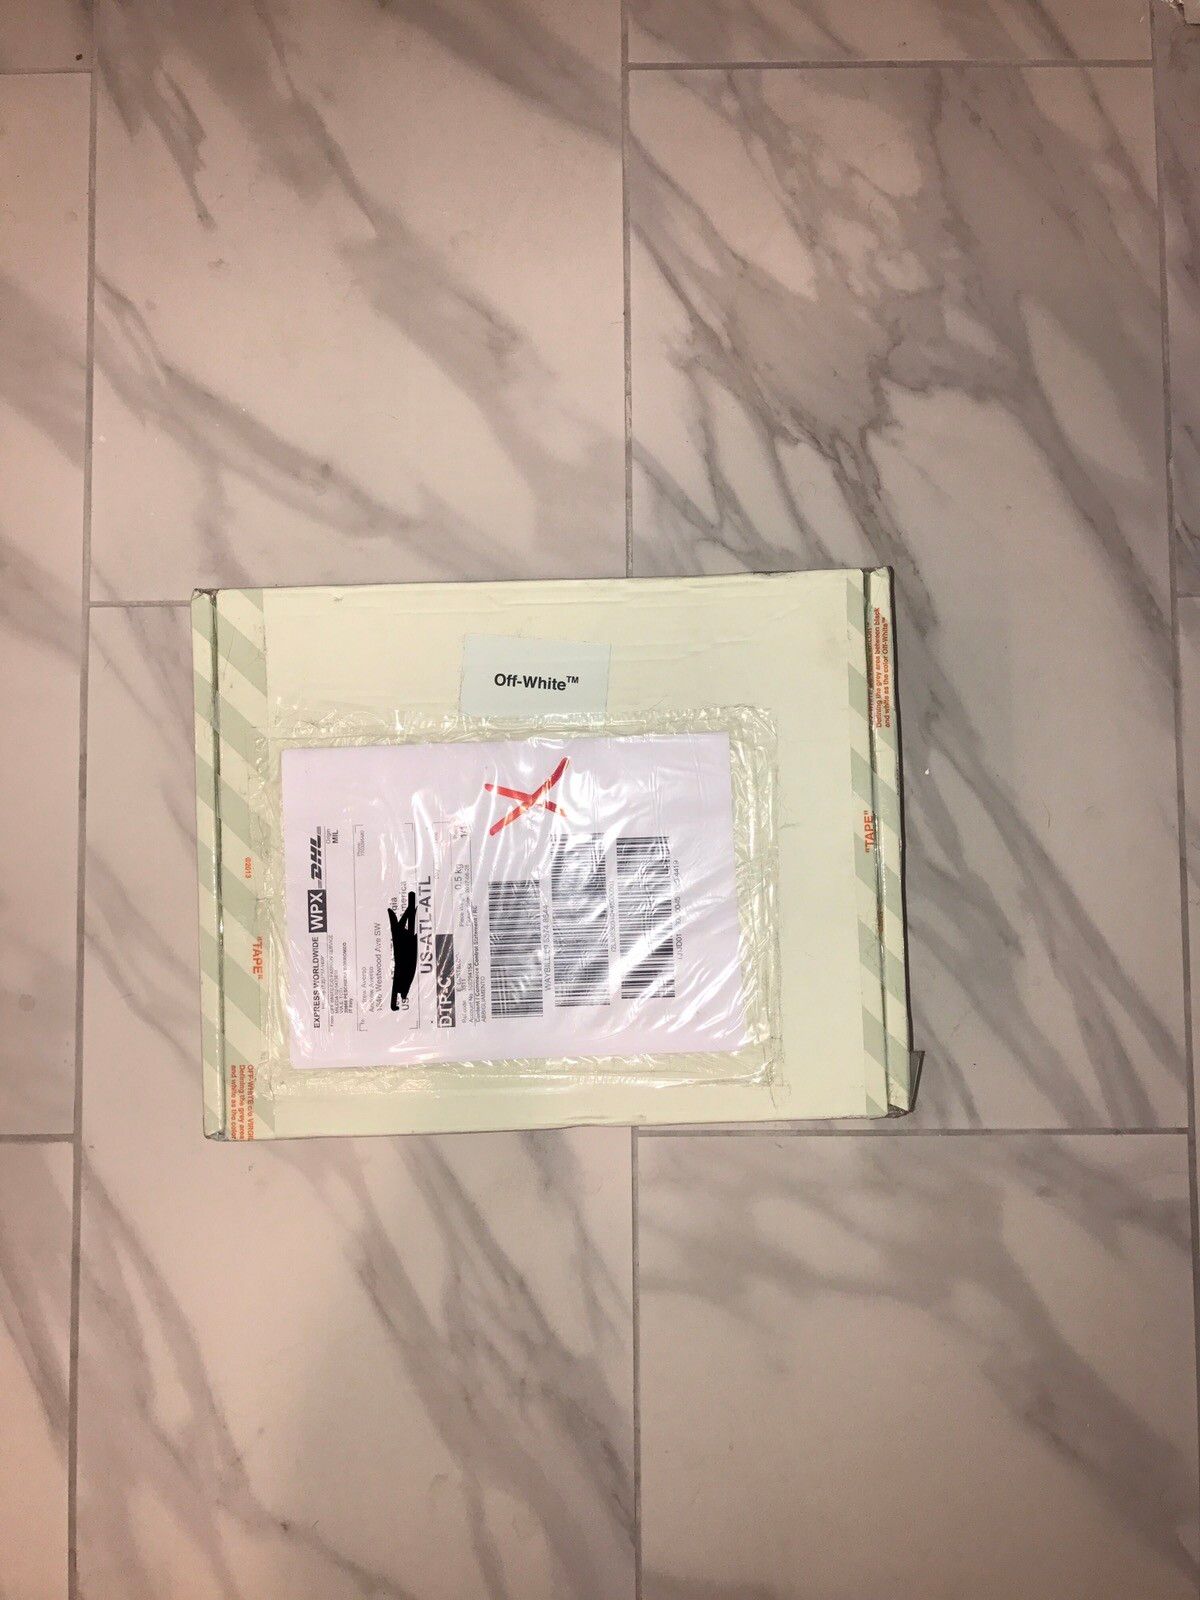 Off-White Off-White X Umbro Shorts Size US 31 - 2 Preview